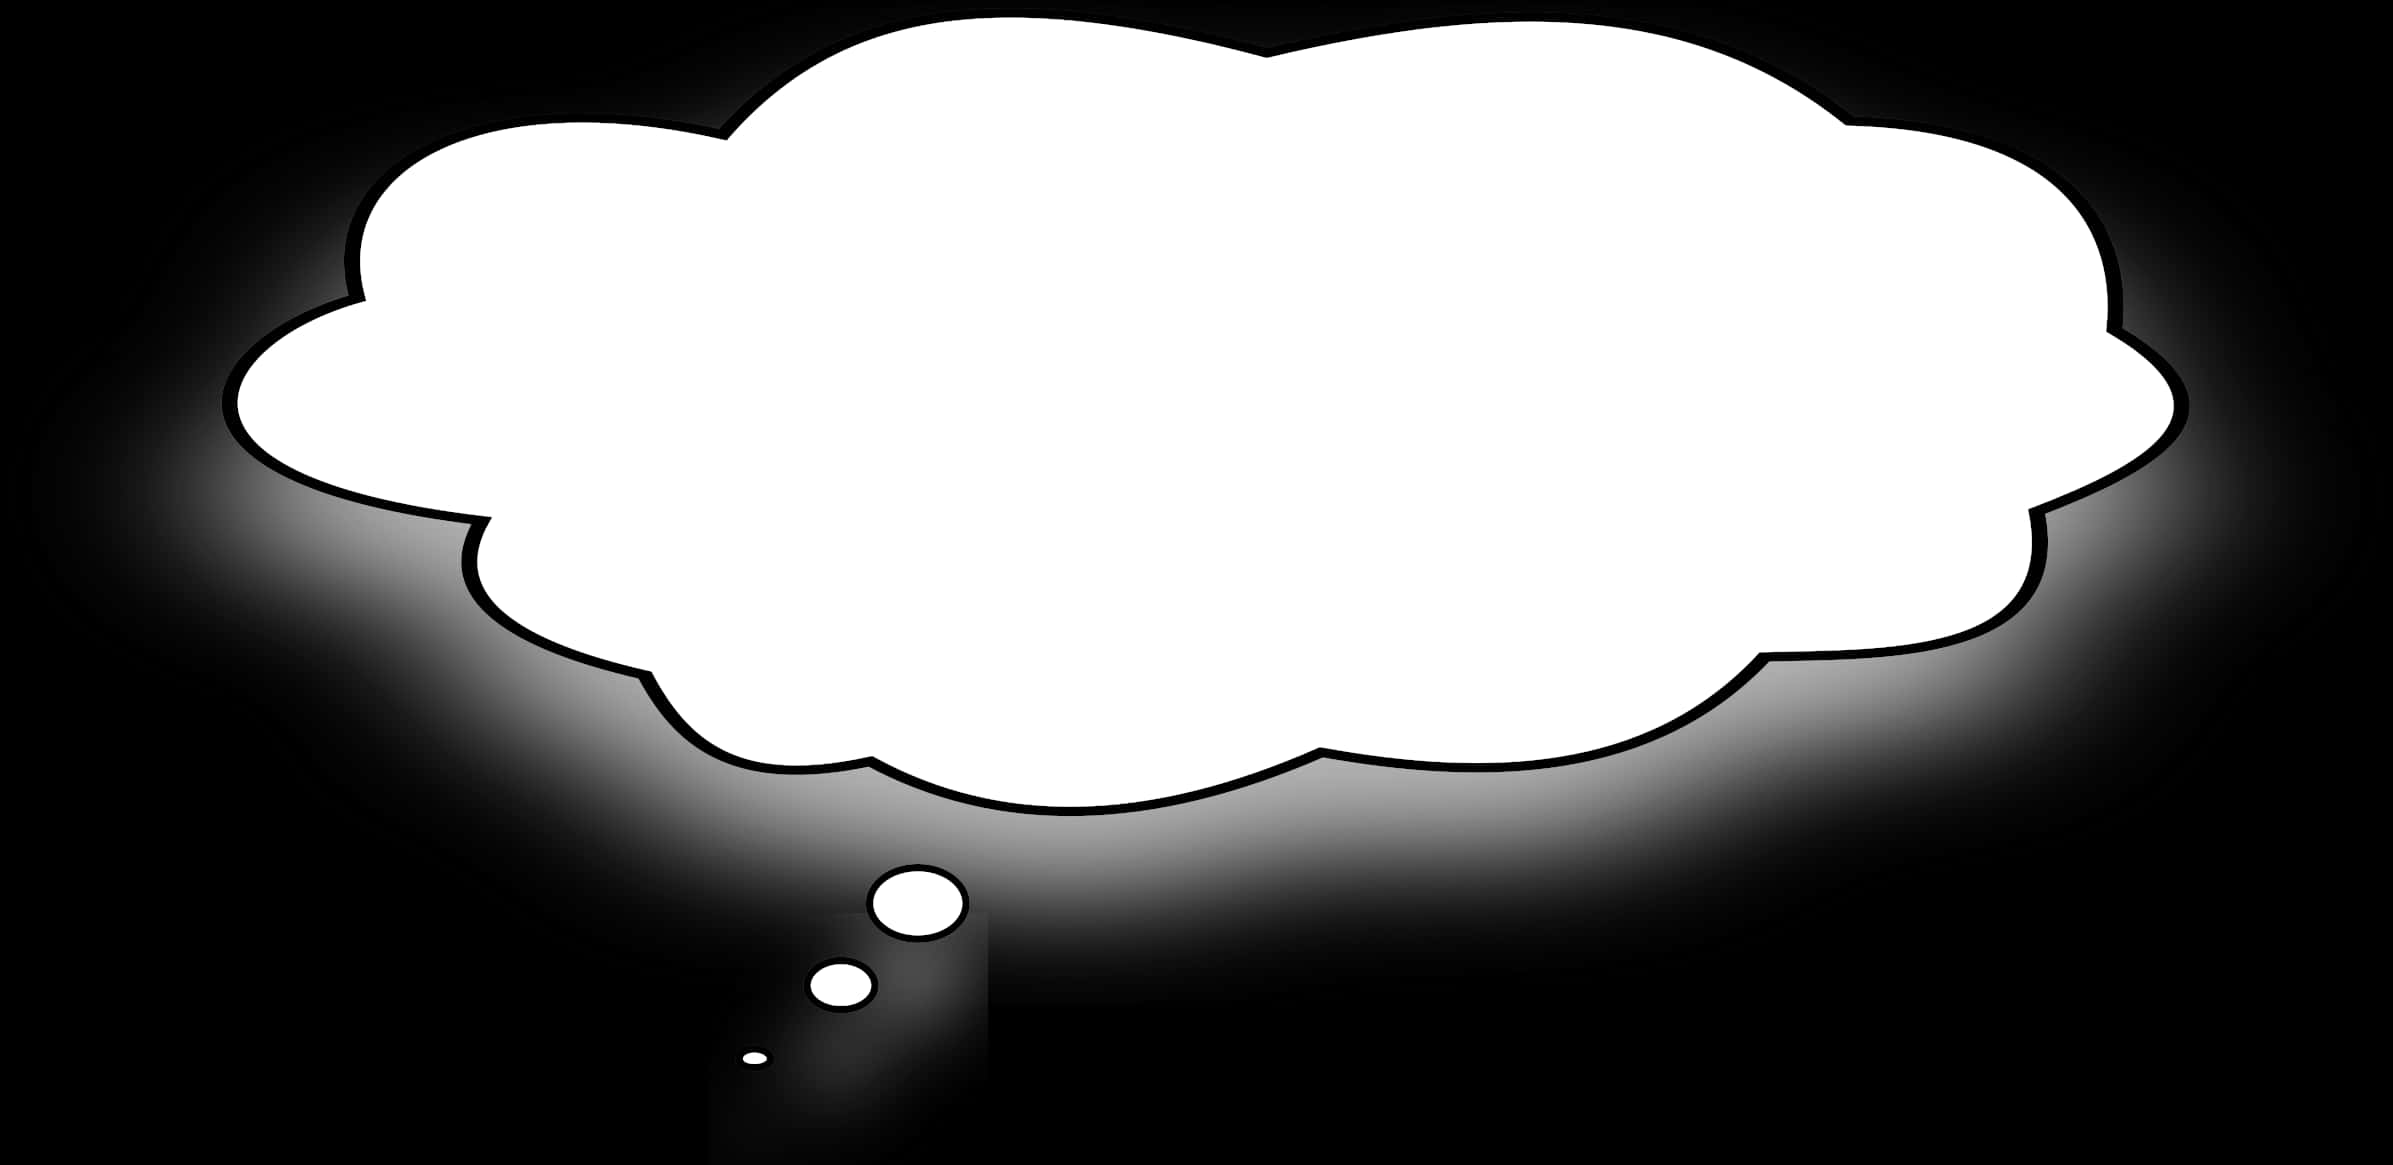 Thought Bubble Graphic Black Background PNG image